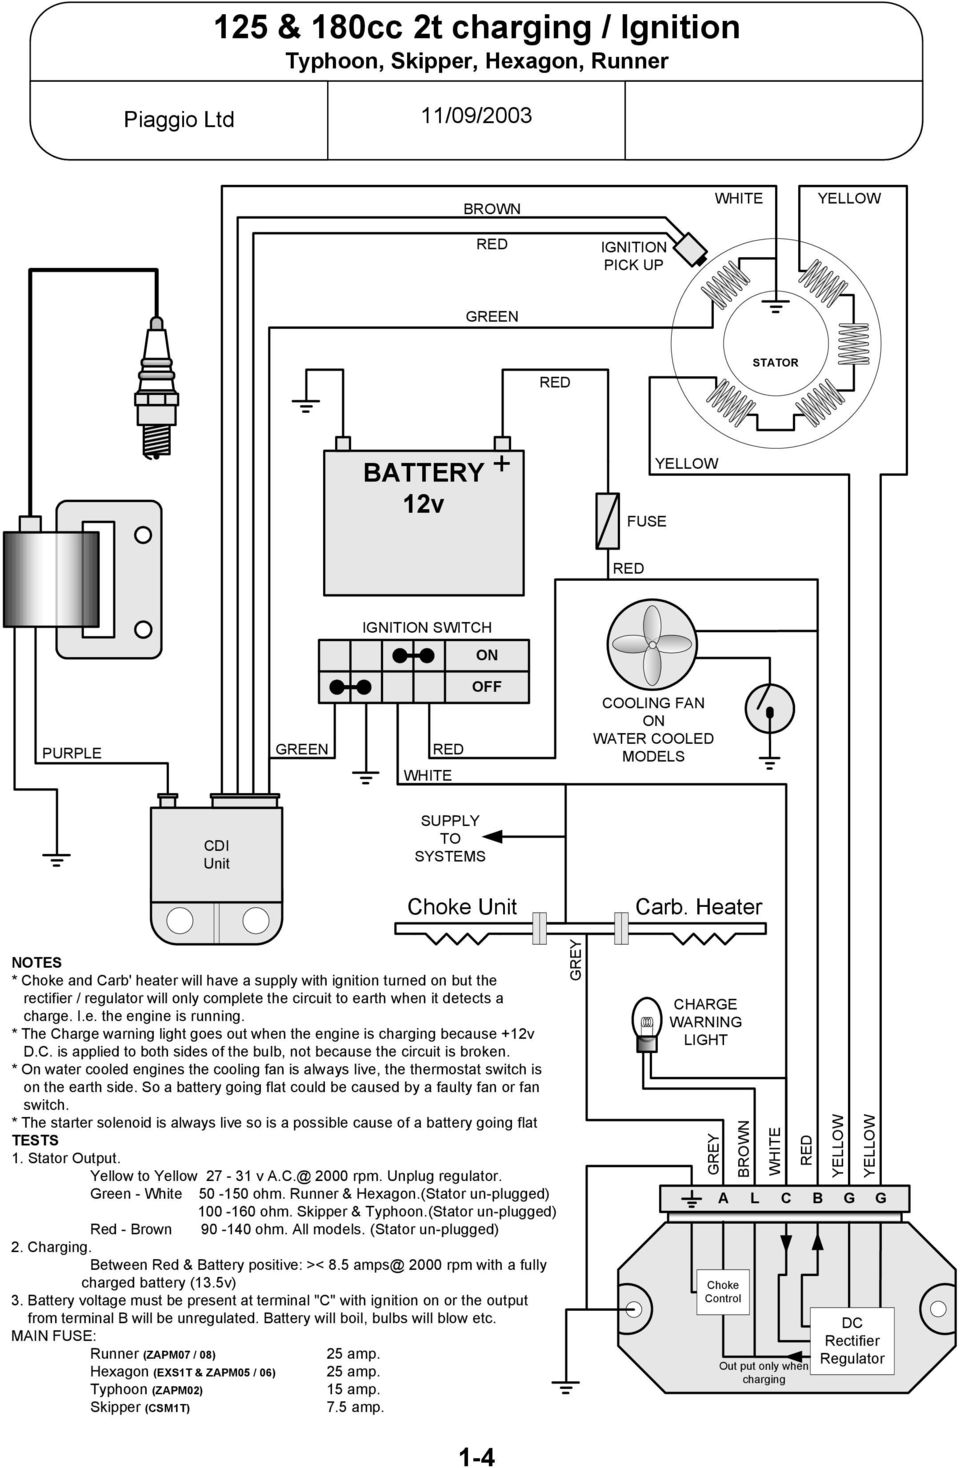 Heater NOTES * Choke and Carb' heater will have a supply with ignition turned on but the rectifier / regulator will only complete the circuit to earth when it detects a charge. I.e. the engine is running.